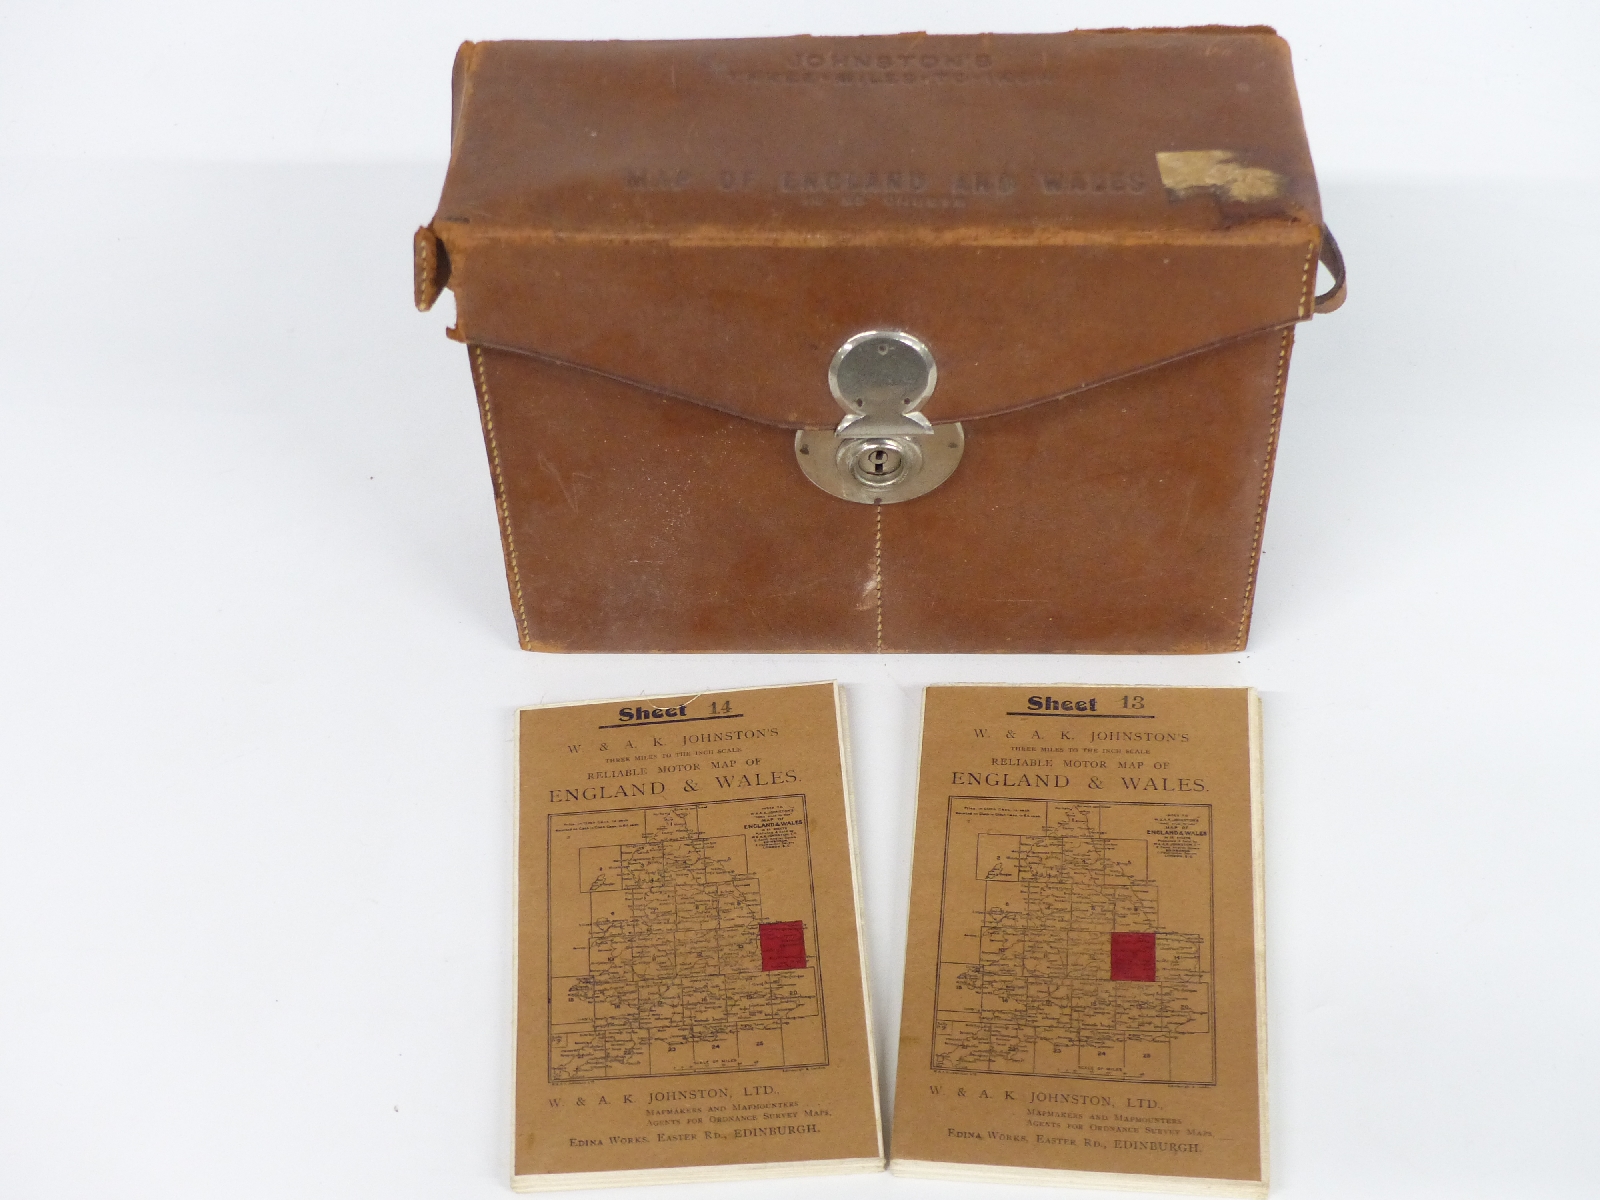 A leather cased set of 25 motor maps of England and Wales by W & AK Johnston, three miles to the